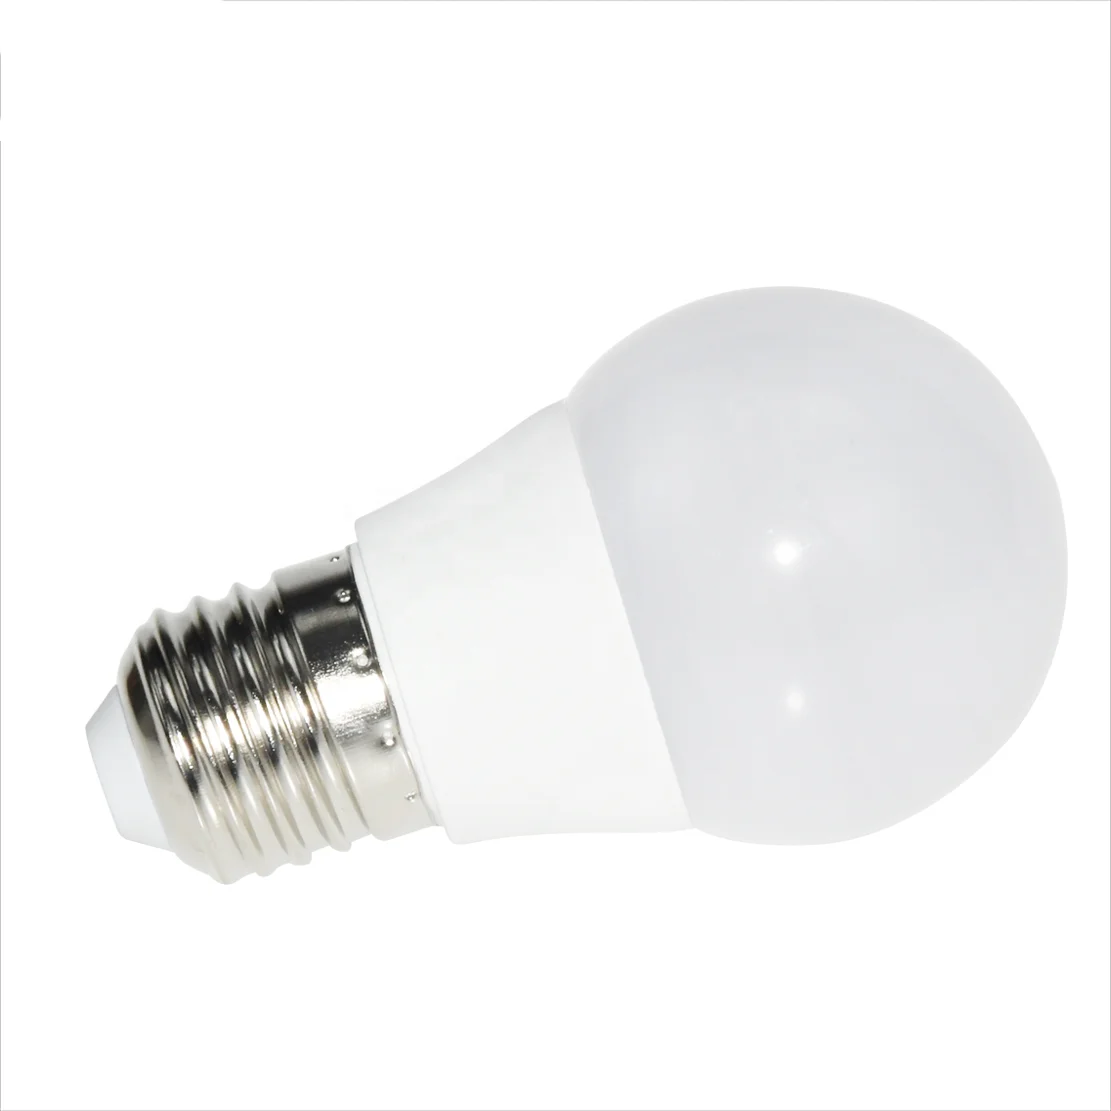 Residential High Quality Globe A70 Dimmable Lamp E27 B22 Base 15W LED Bulb With CE Certification